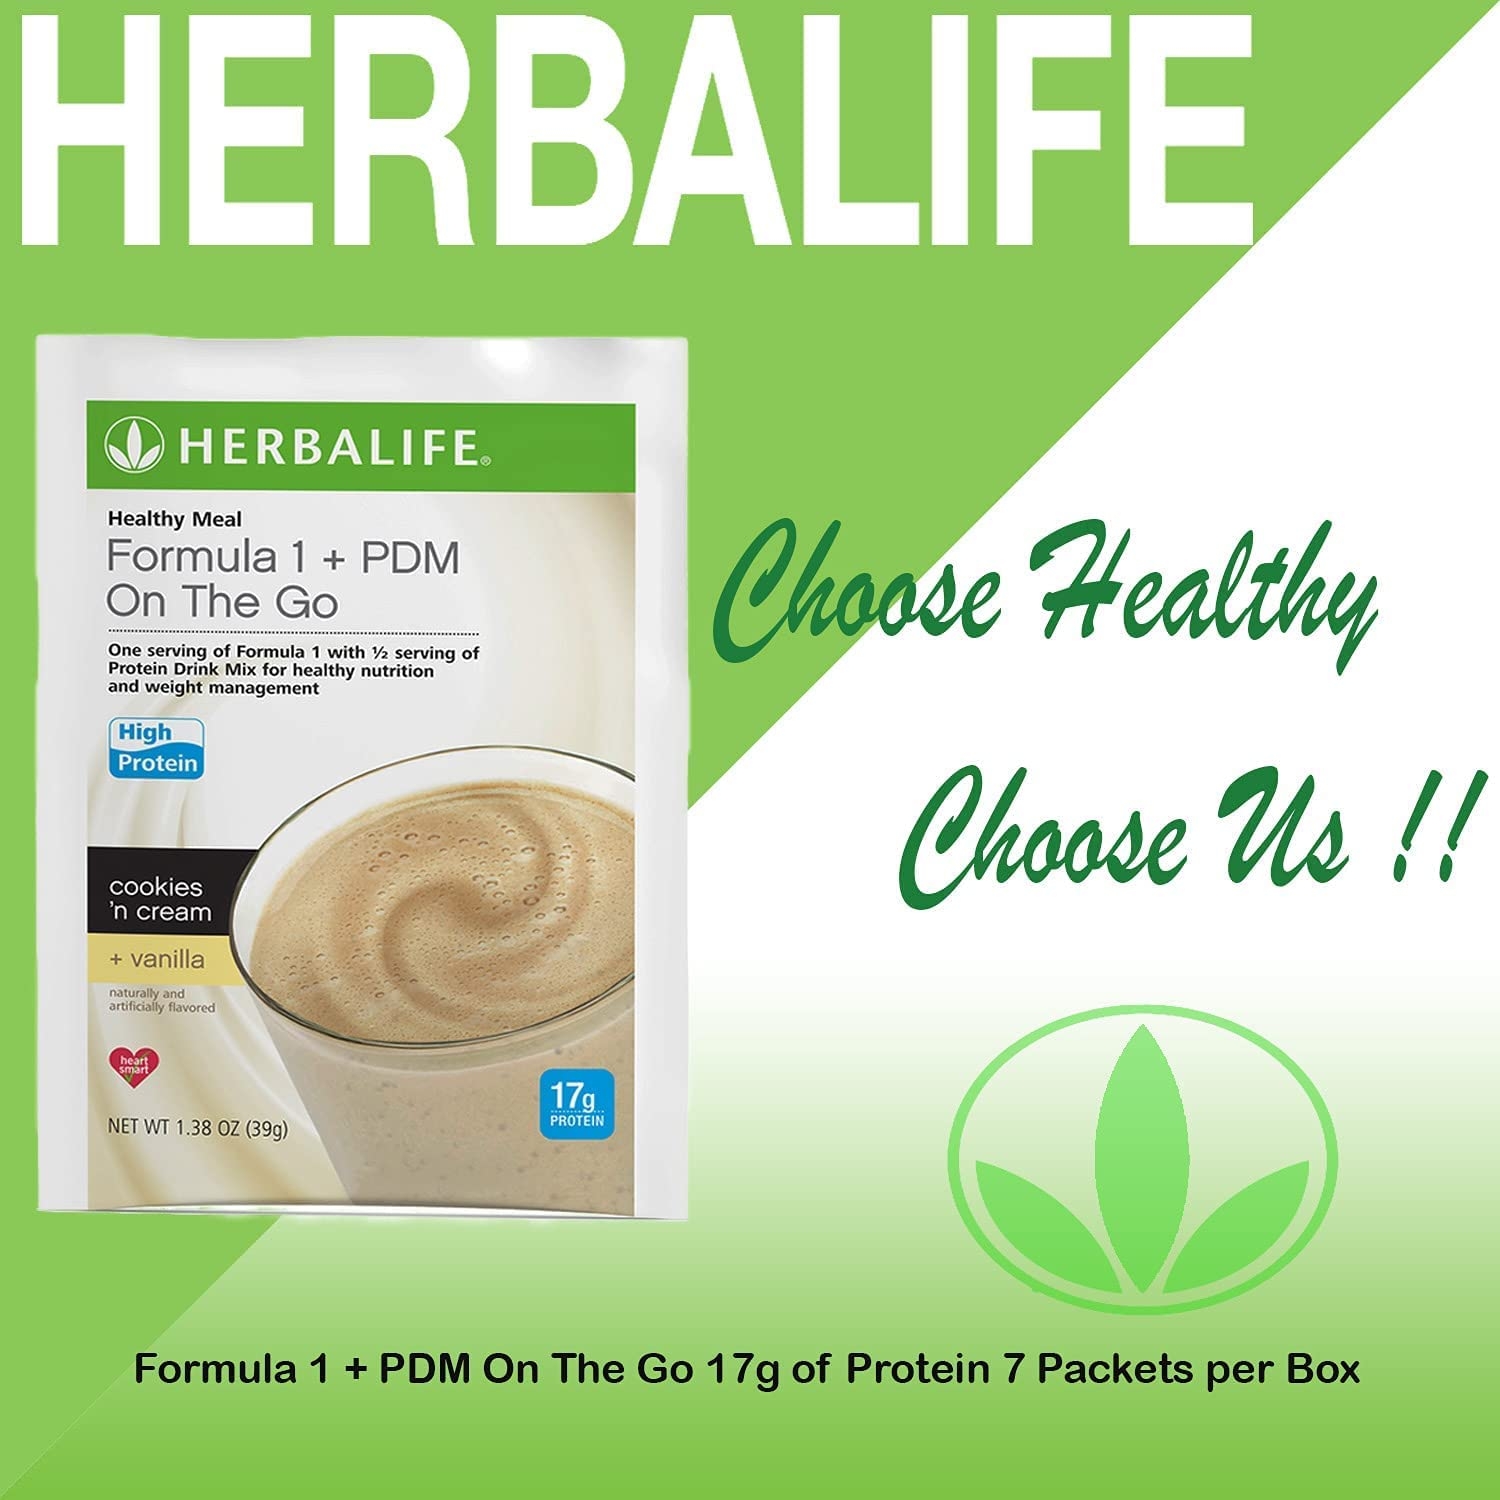 Herbalife Formula 1 + PDM On The Go: 17g of Protein 7 Packets per Box (Cookies and Cream + Vanilla), Protein For Energy and Nutrition, sustain Energy and Satisfy Hunger